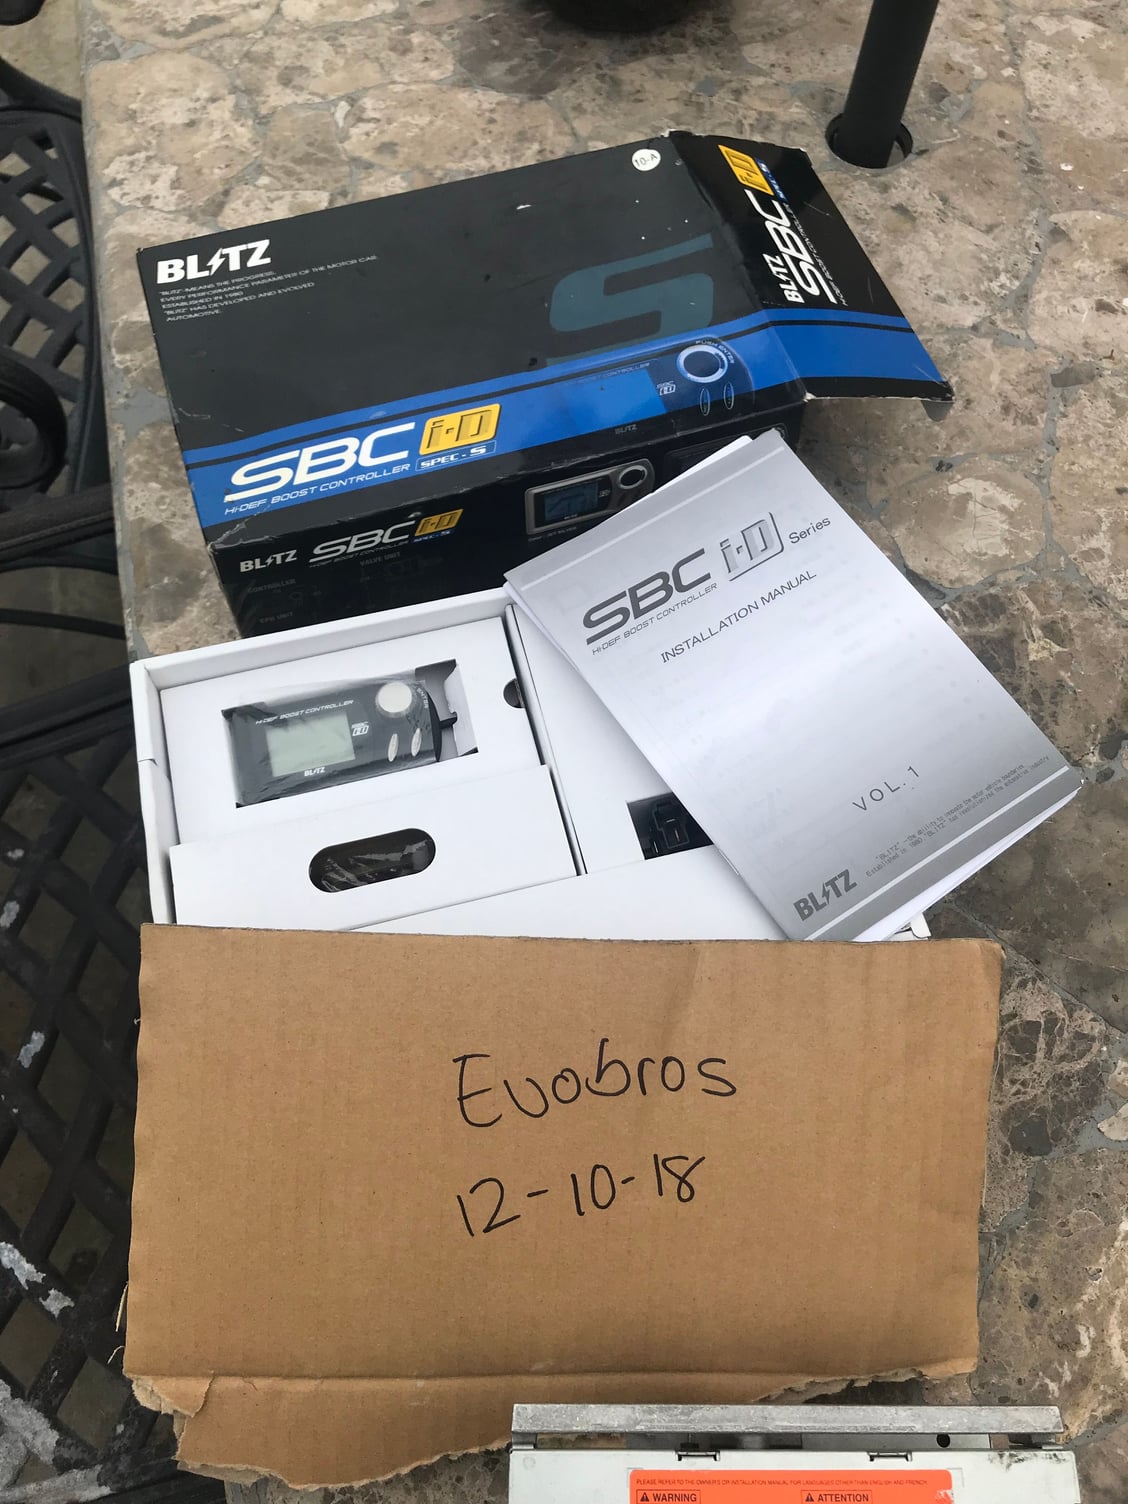 Engine - Electrical - Blitz SBC I-d spec S boost controller - New - All Years Any Make All Models - Los Angeles, CA 90001, United States